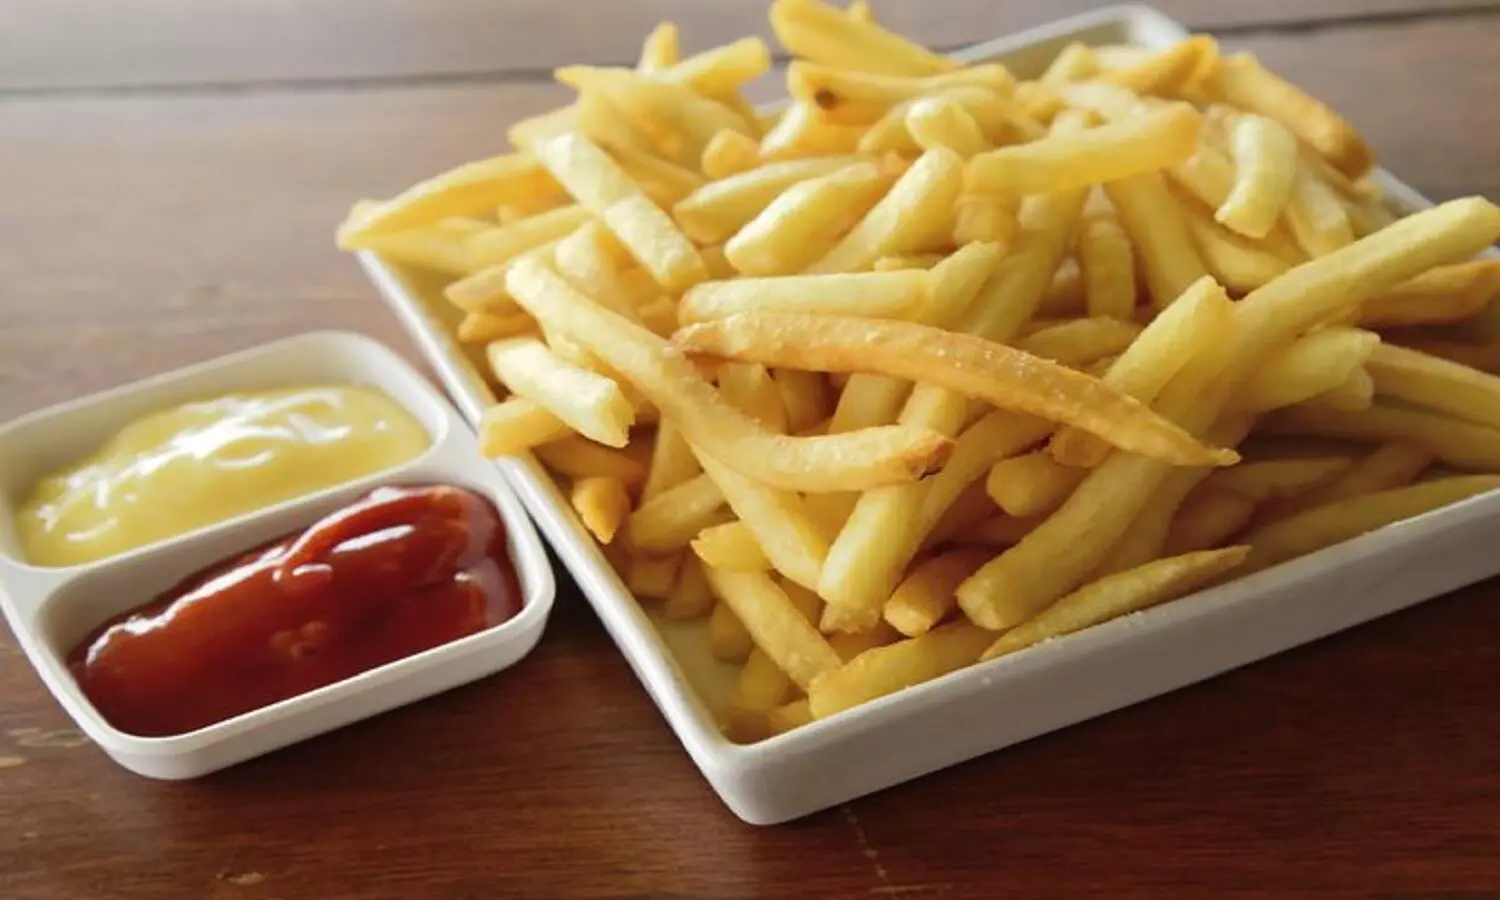 How To Make French fries